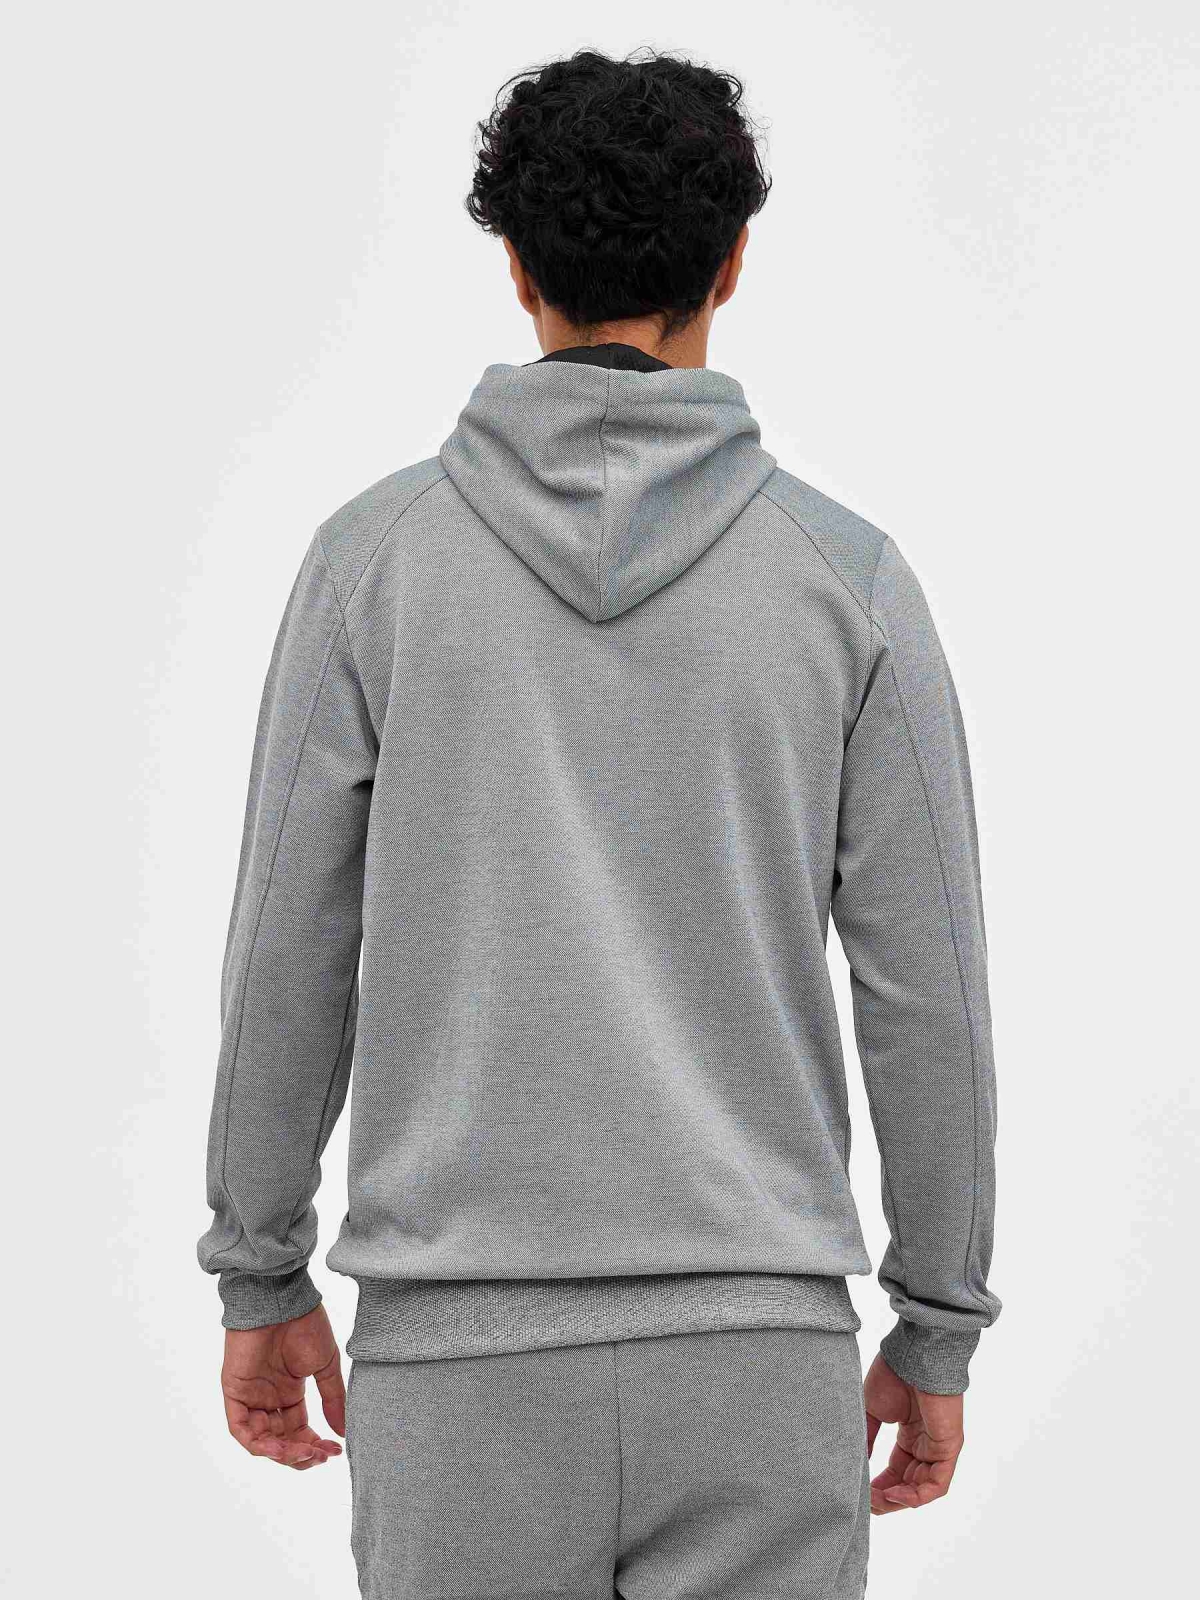 Semiclosed sweatshirt with hood grey middle back view